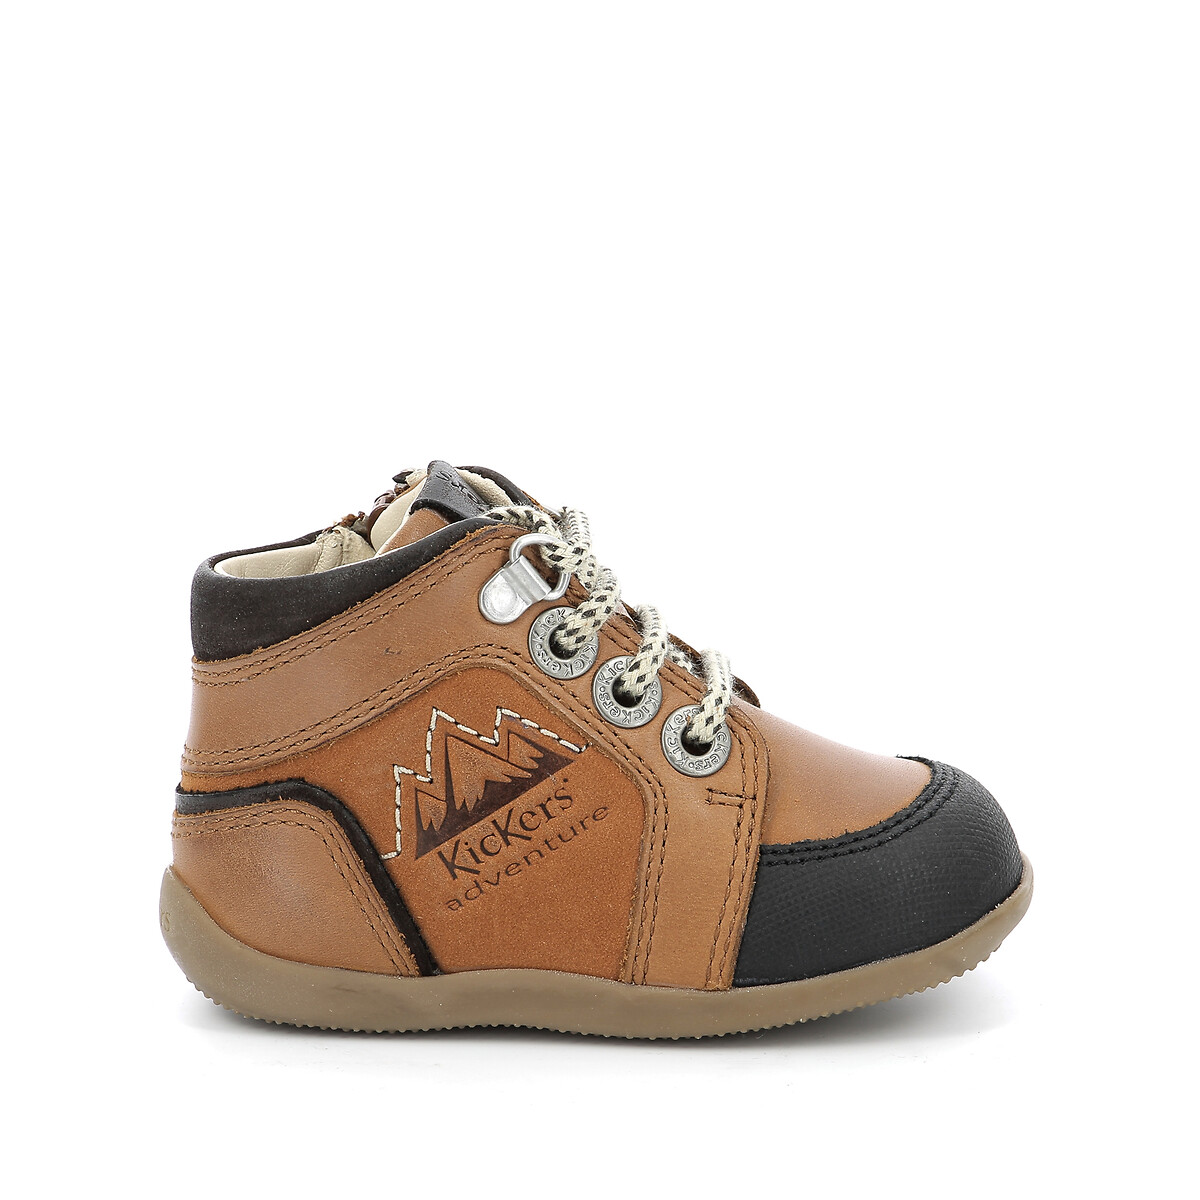 Image of Kids Bins Mountain Ankle Boots in Leather with Laces